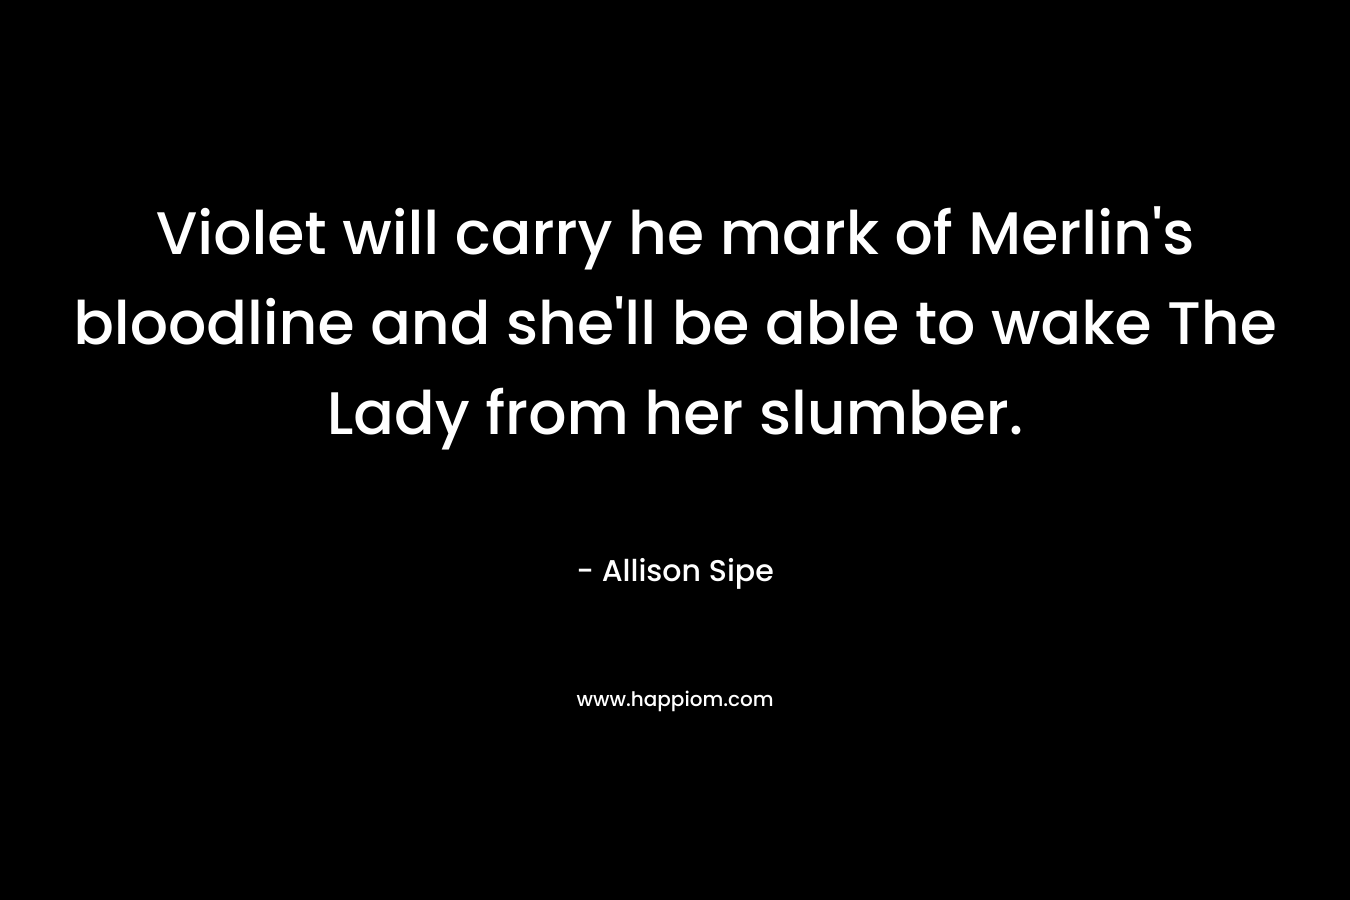 Violet will carry he mark of Merlin's bloodline and she'll be able to wake The Lady from her slumber.